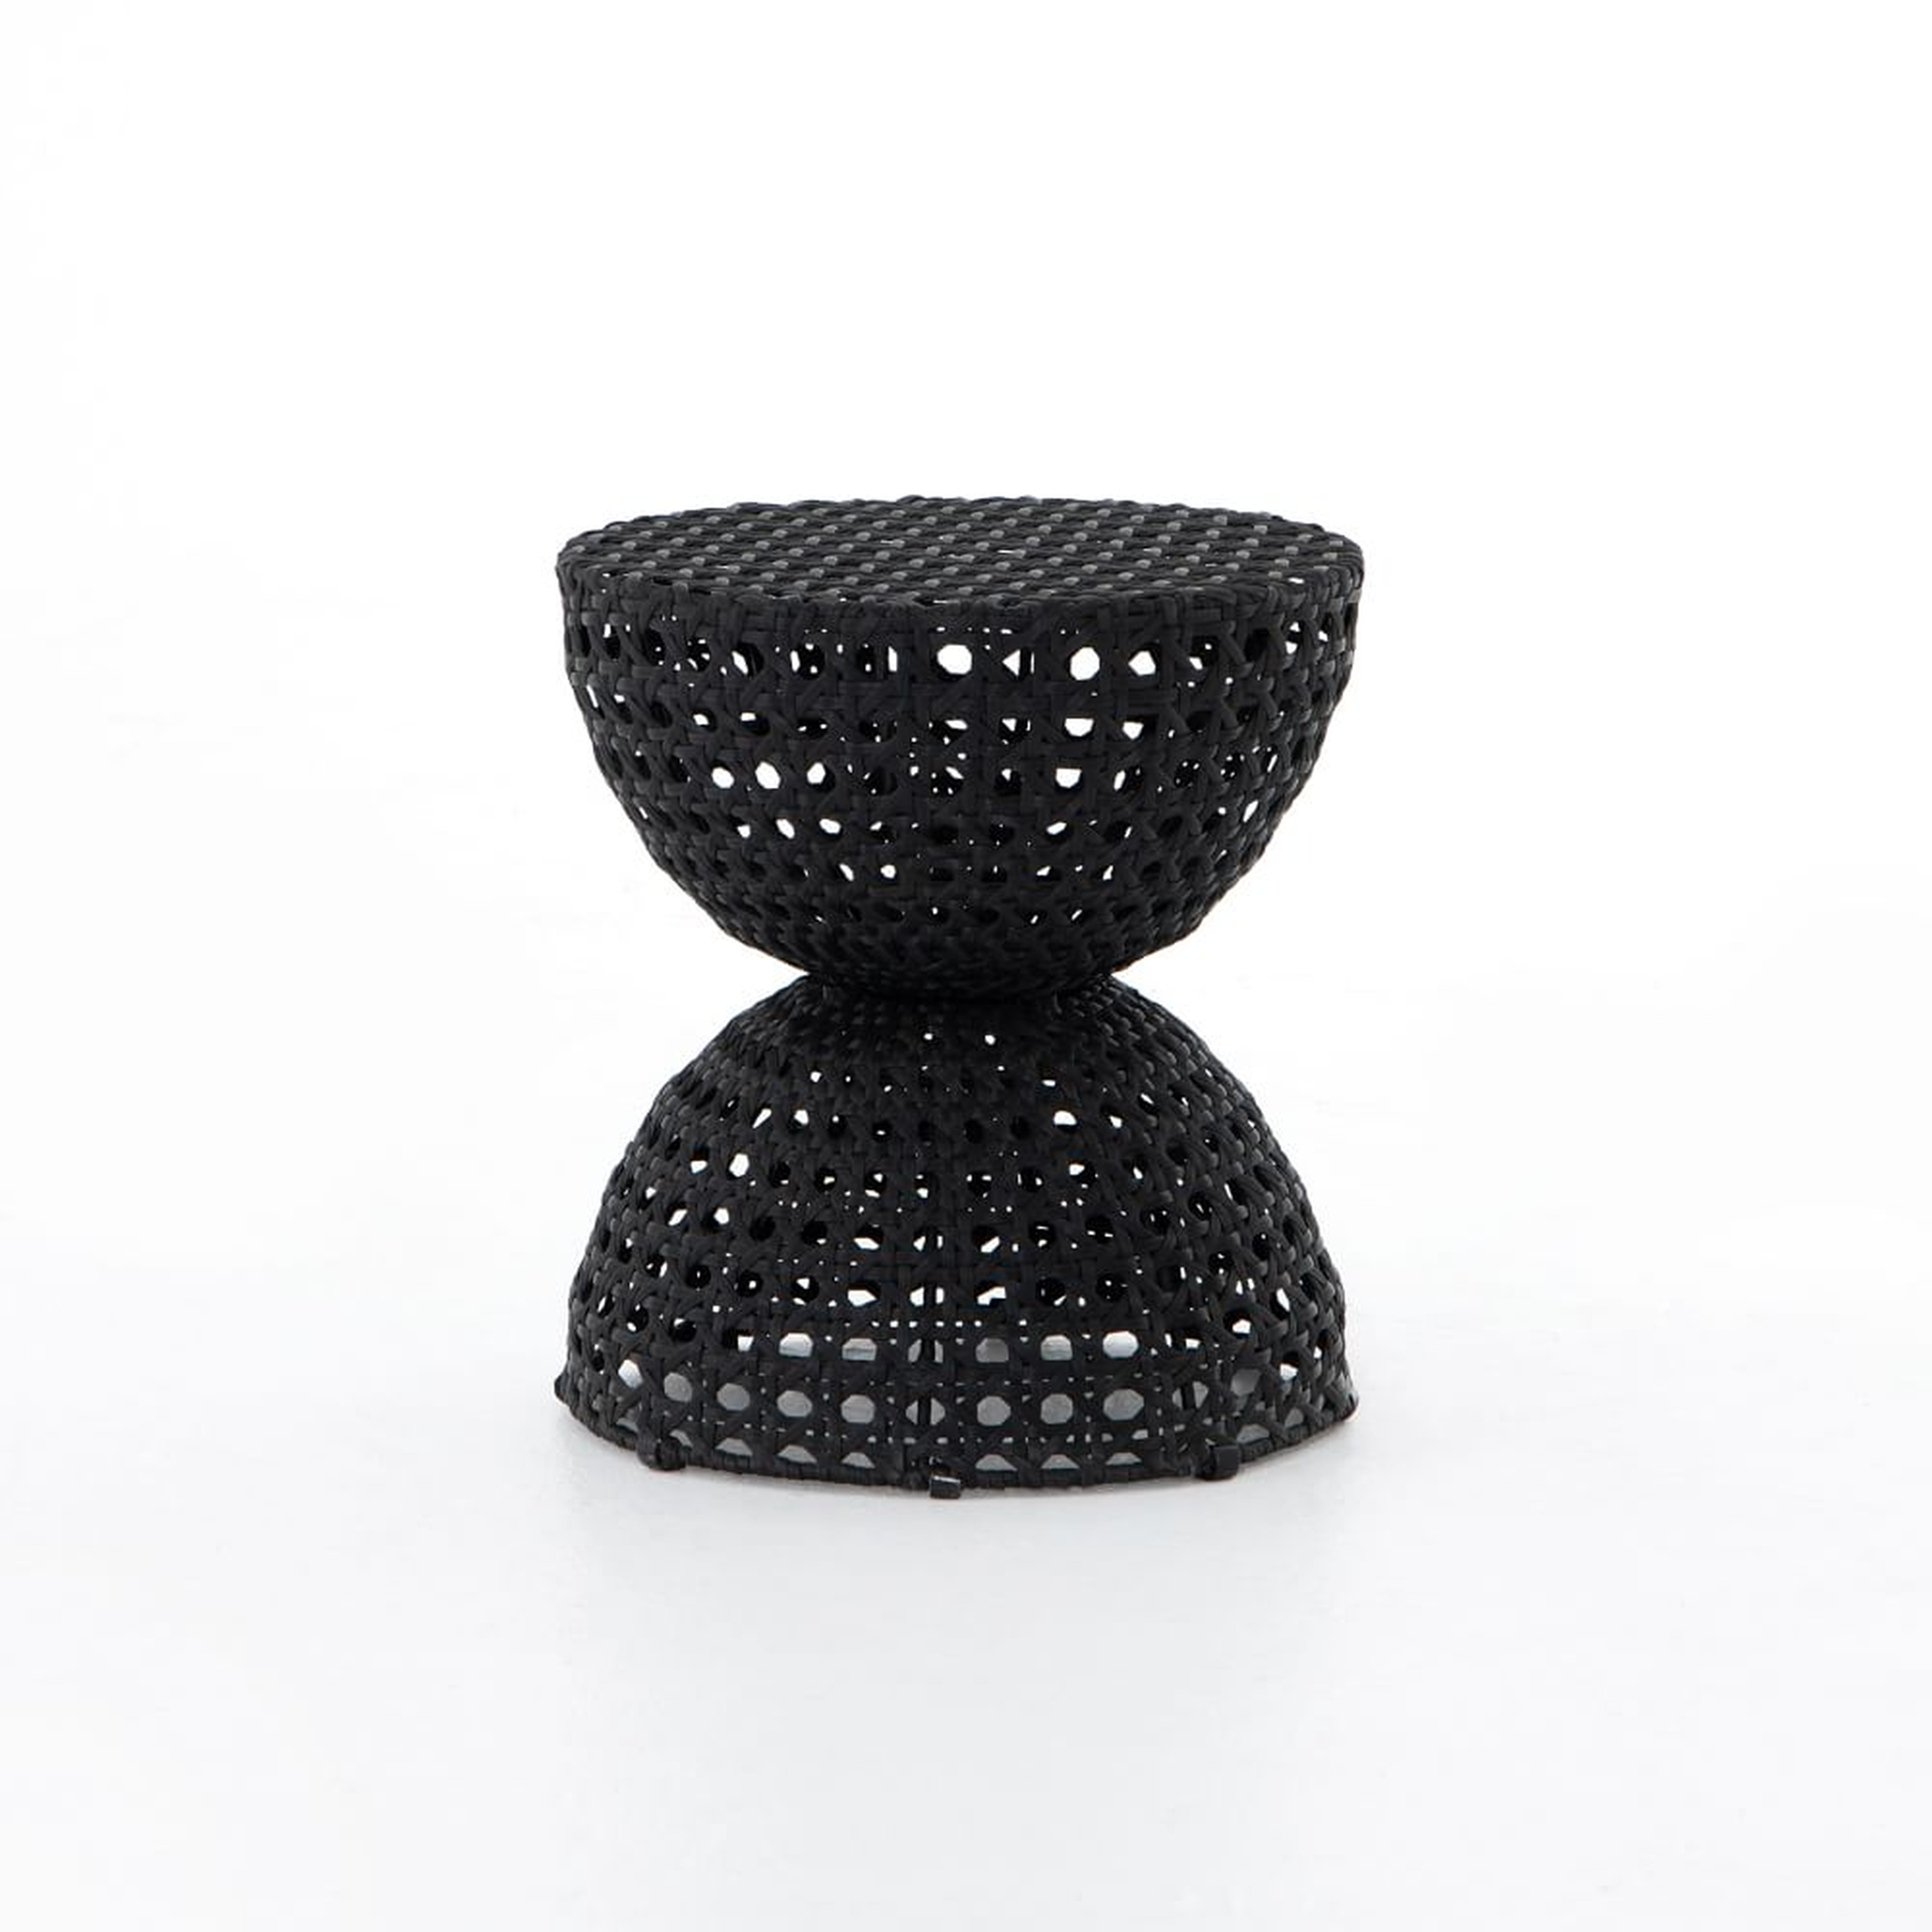 Woven Outdoor End Table, Black - West Elm